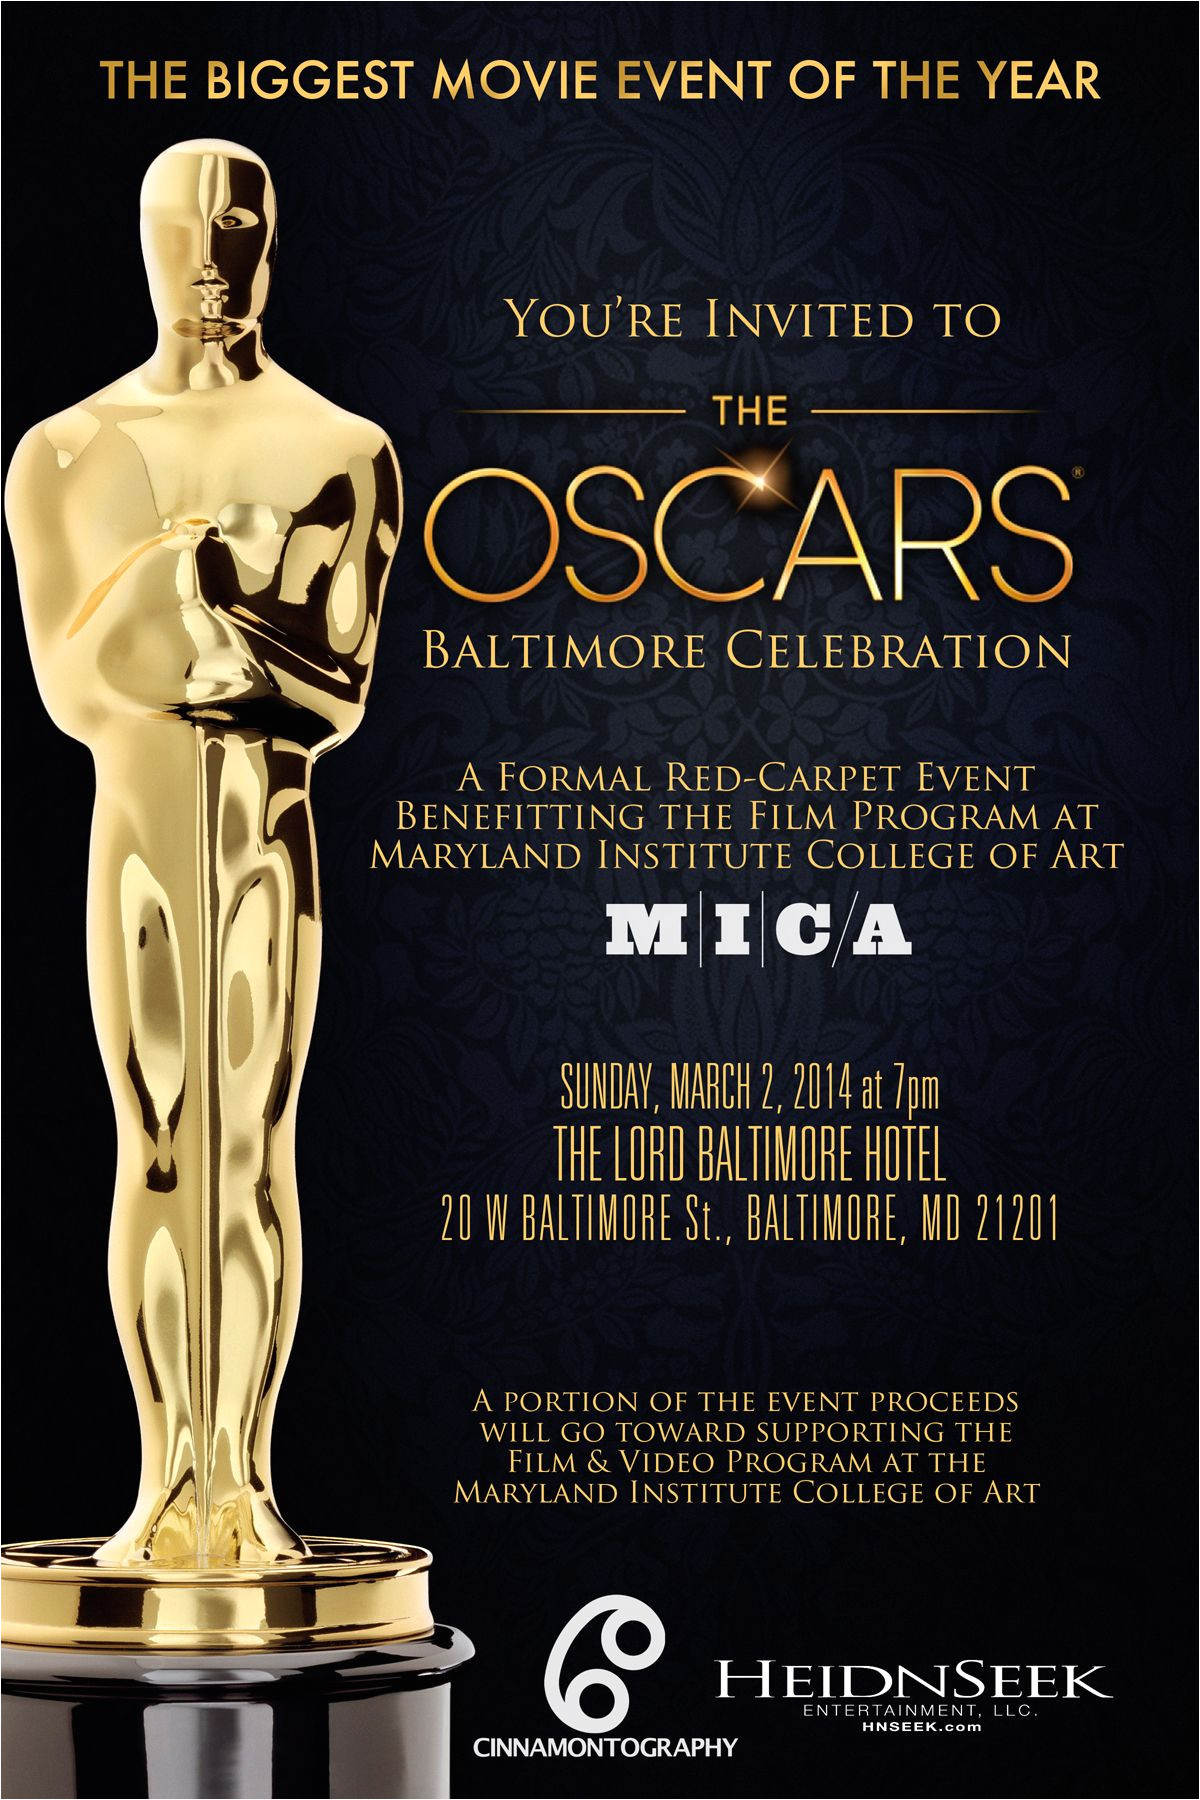 Oscar Party Invitation Template Image Result for Oscar themed Party Sayings Invitations